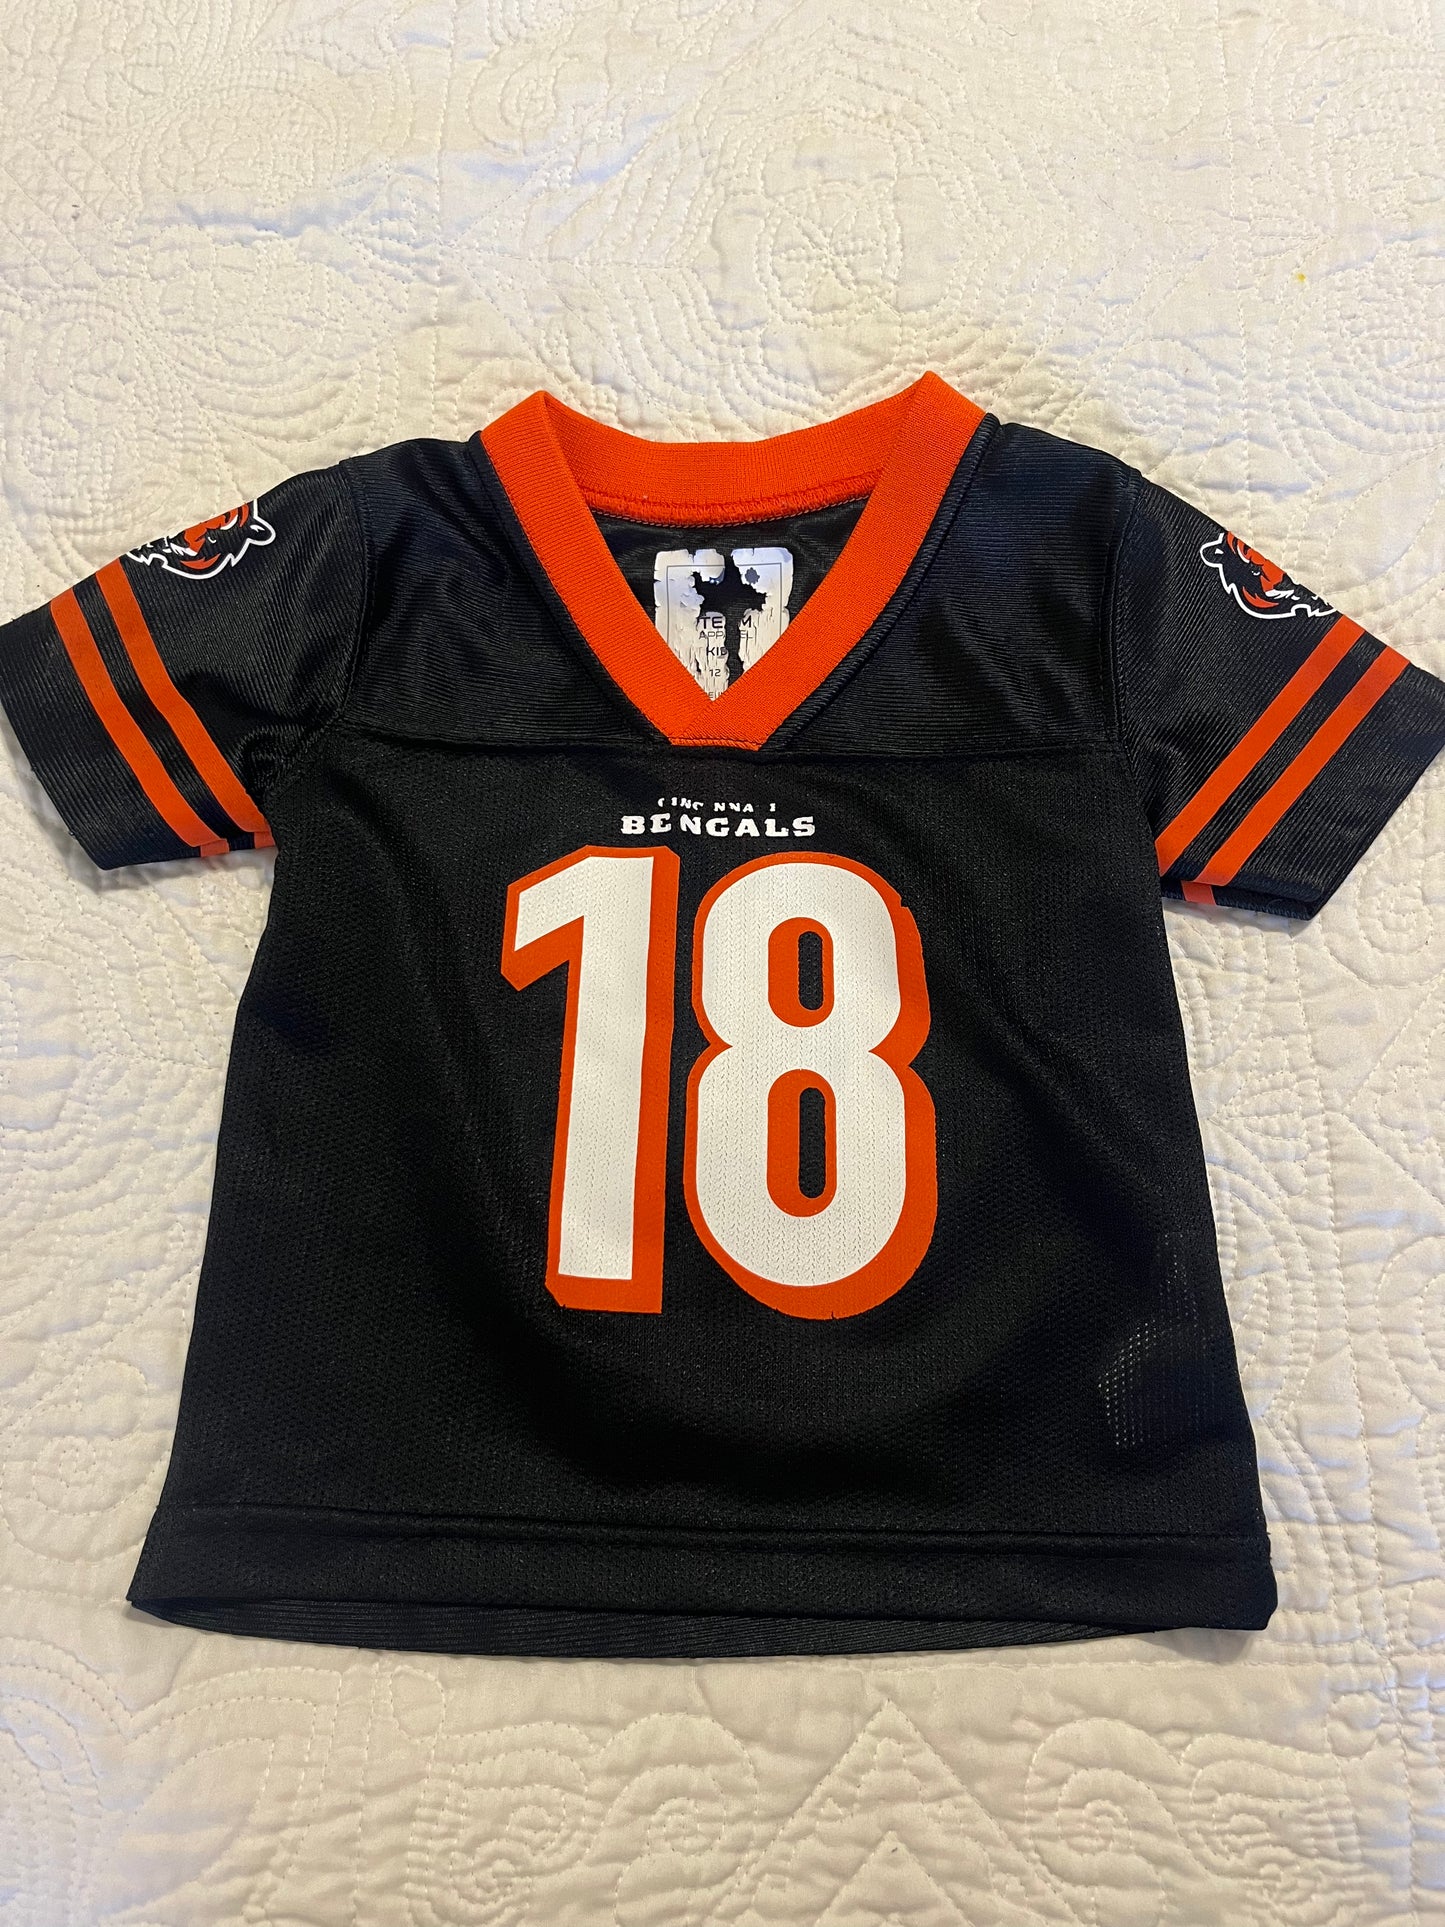 REDUCED: Bengals Jersey 12M